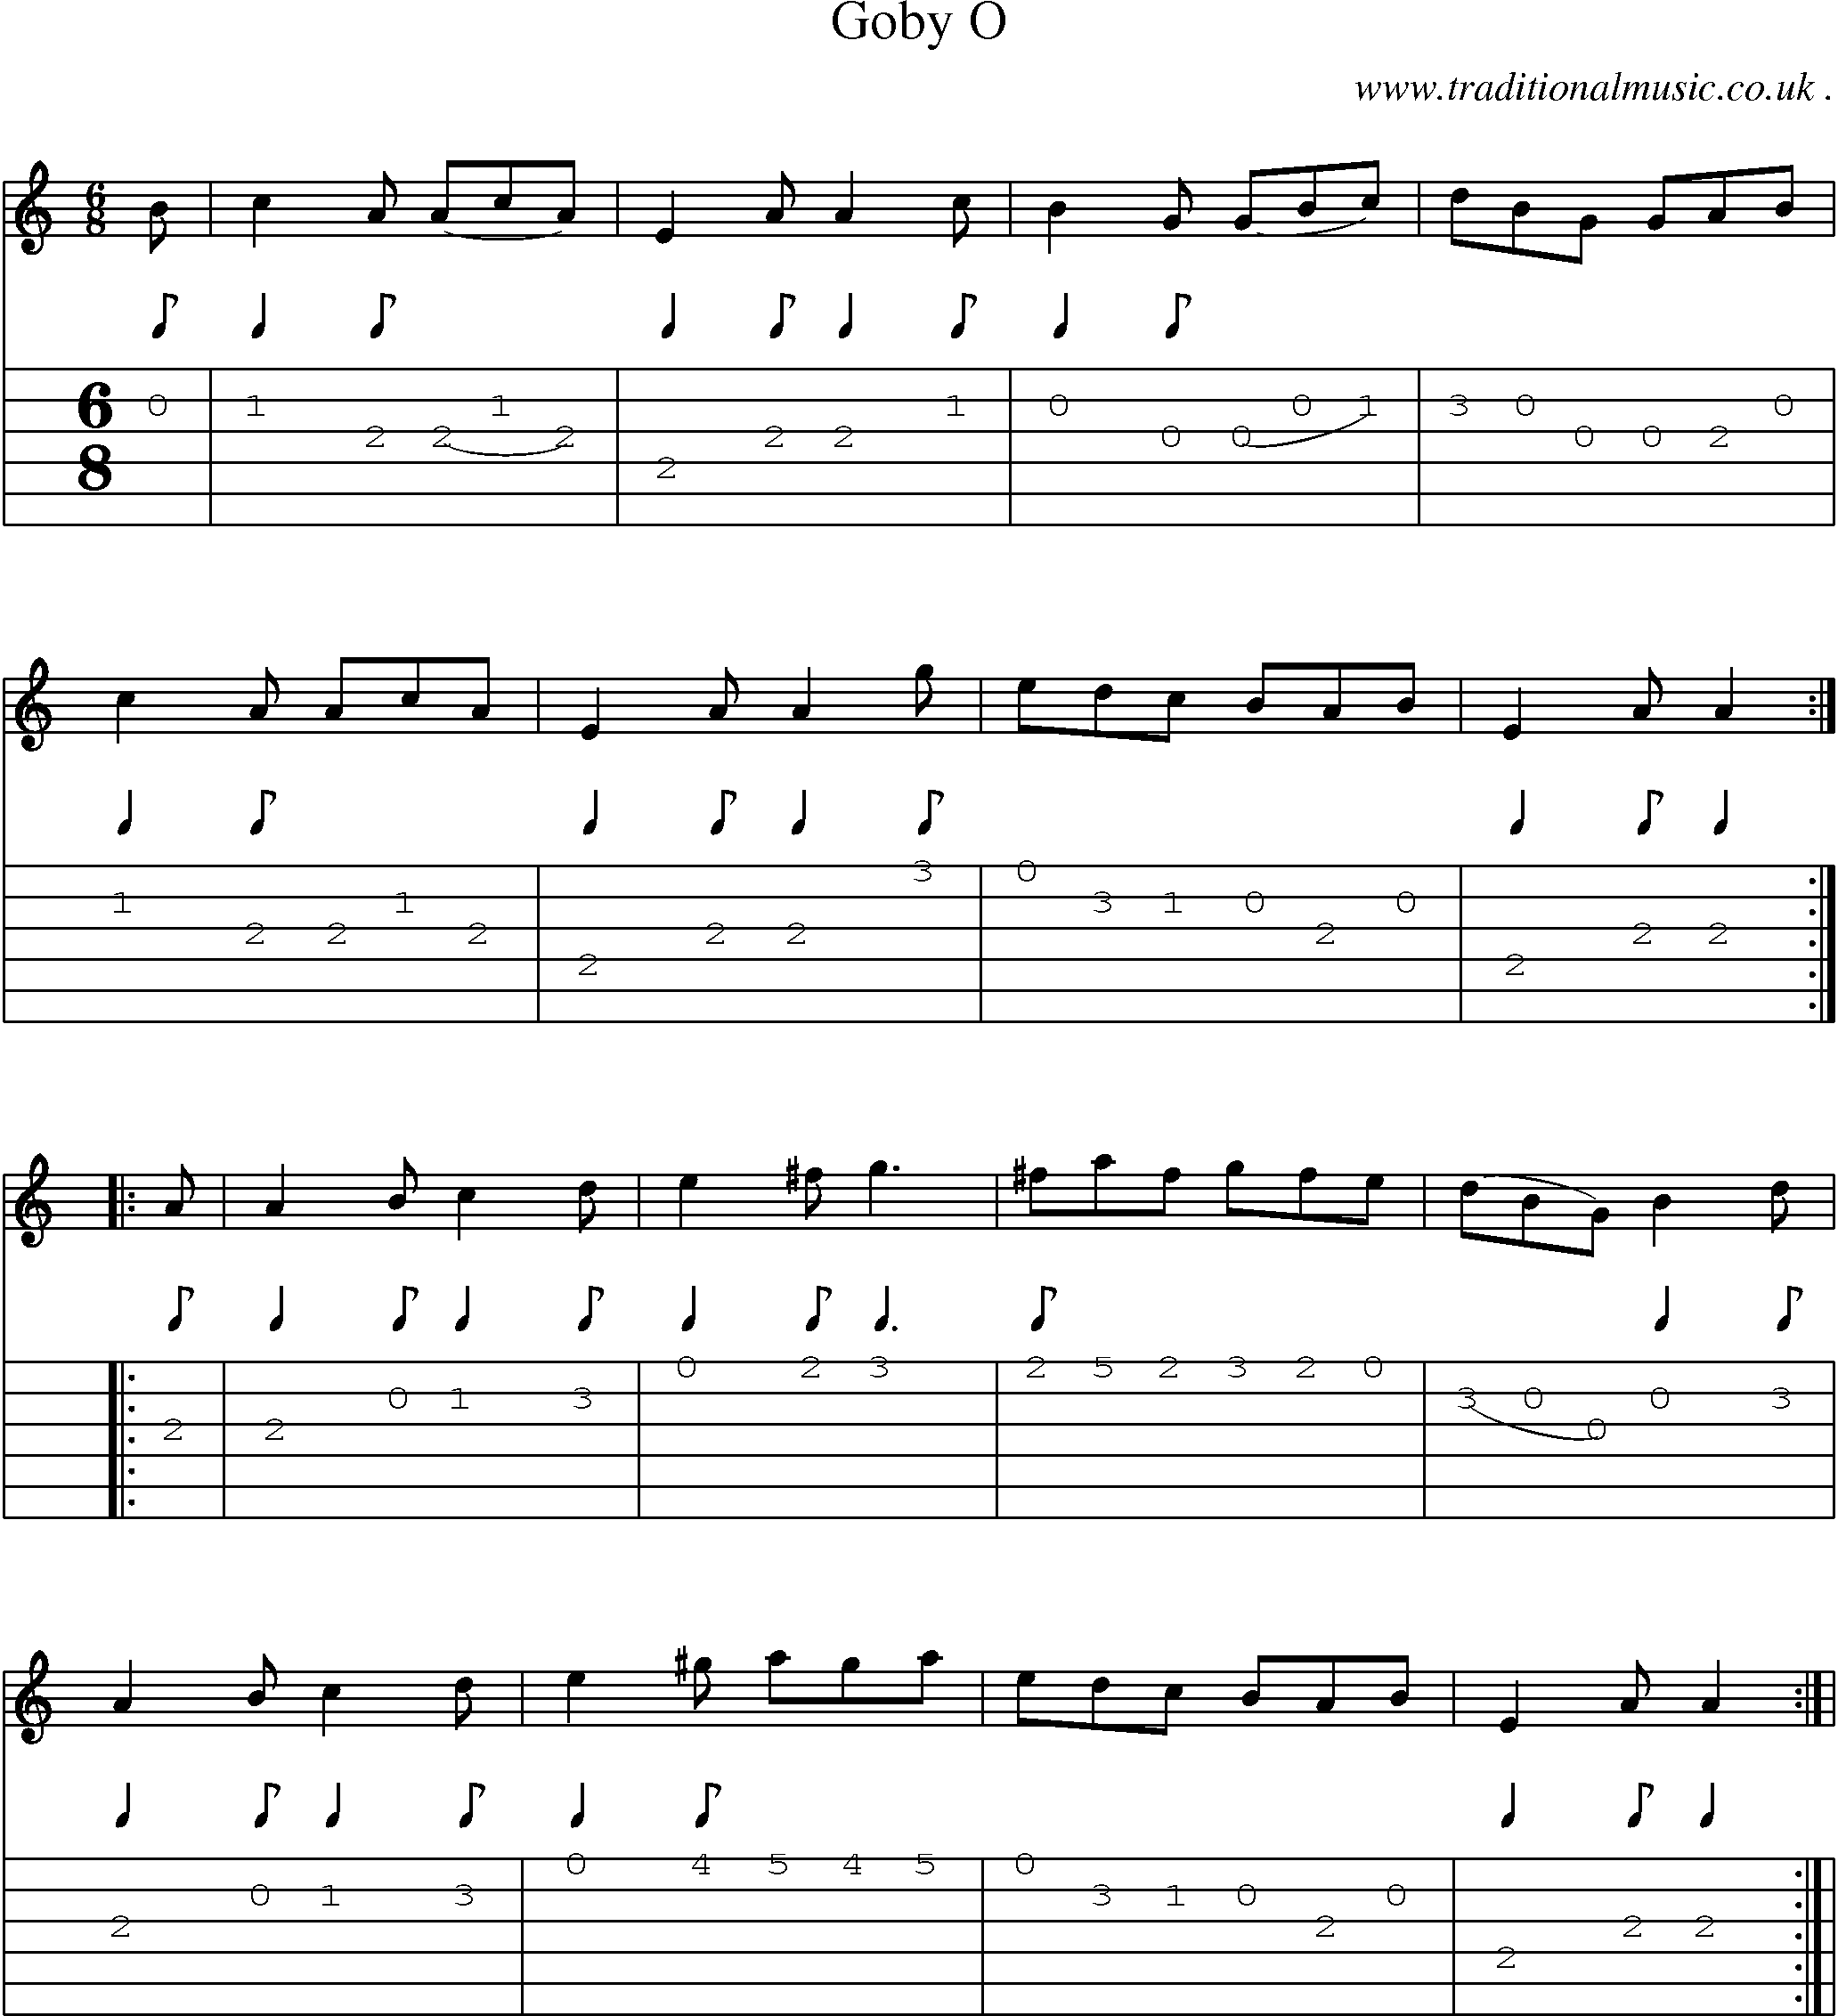 Sheet-Music and Guitar Tabs for Goby O